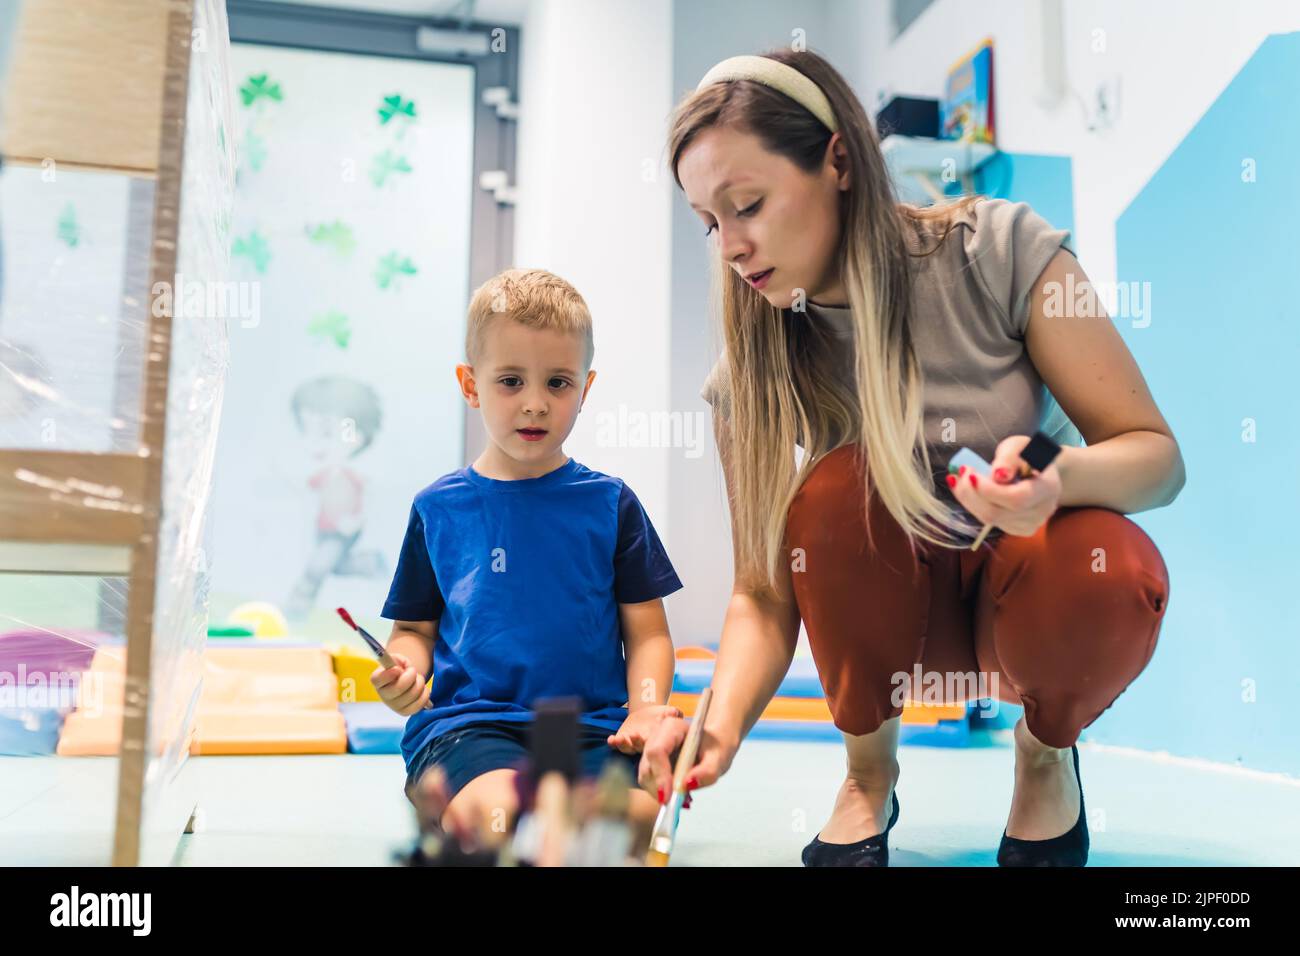 Nursery school. Caucasian toddler boy and his teacher painting on a cling film wrapped around the wooden shelving stand by using brushes and nontoxic paints . Fun game activity for kids sensory skills, creativity, spatial attention and visual perceptual development . High quality photo Stock Photo